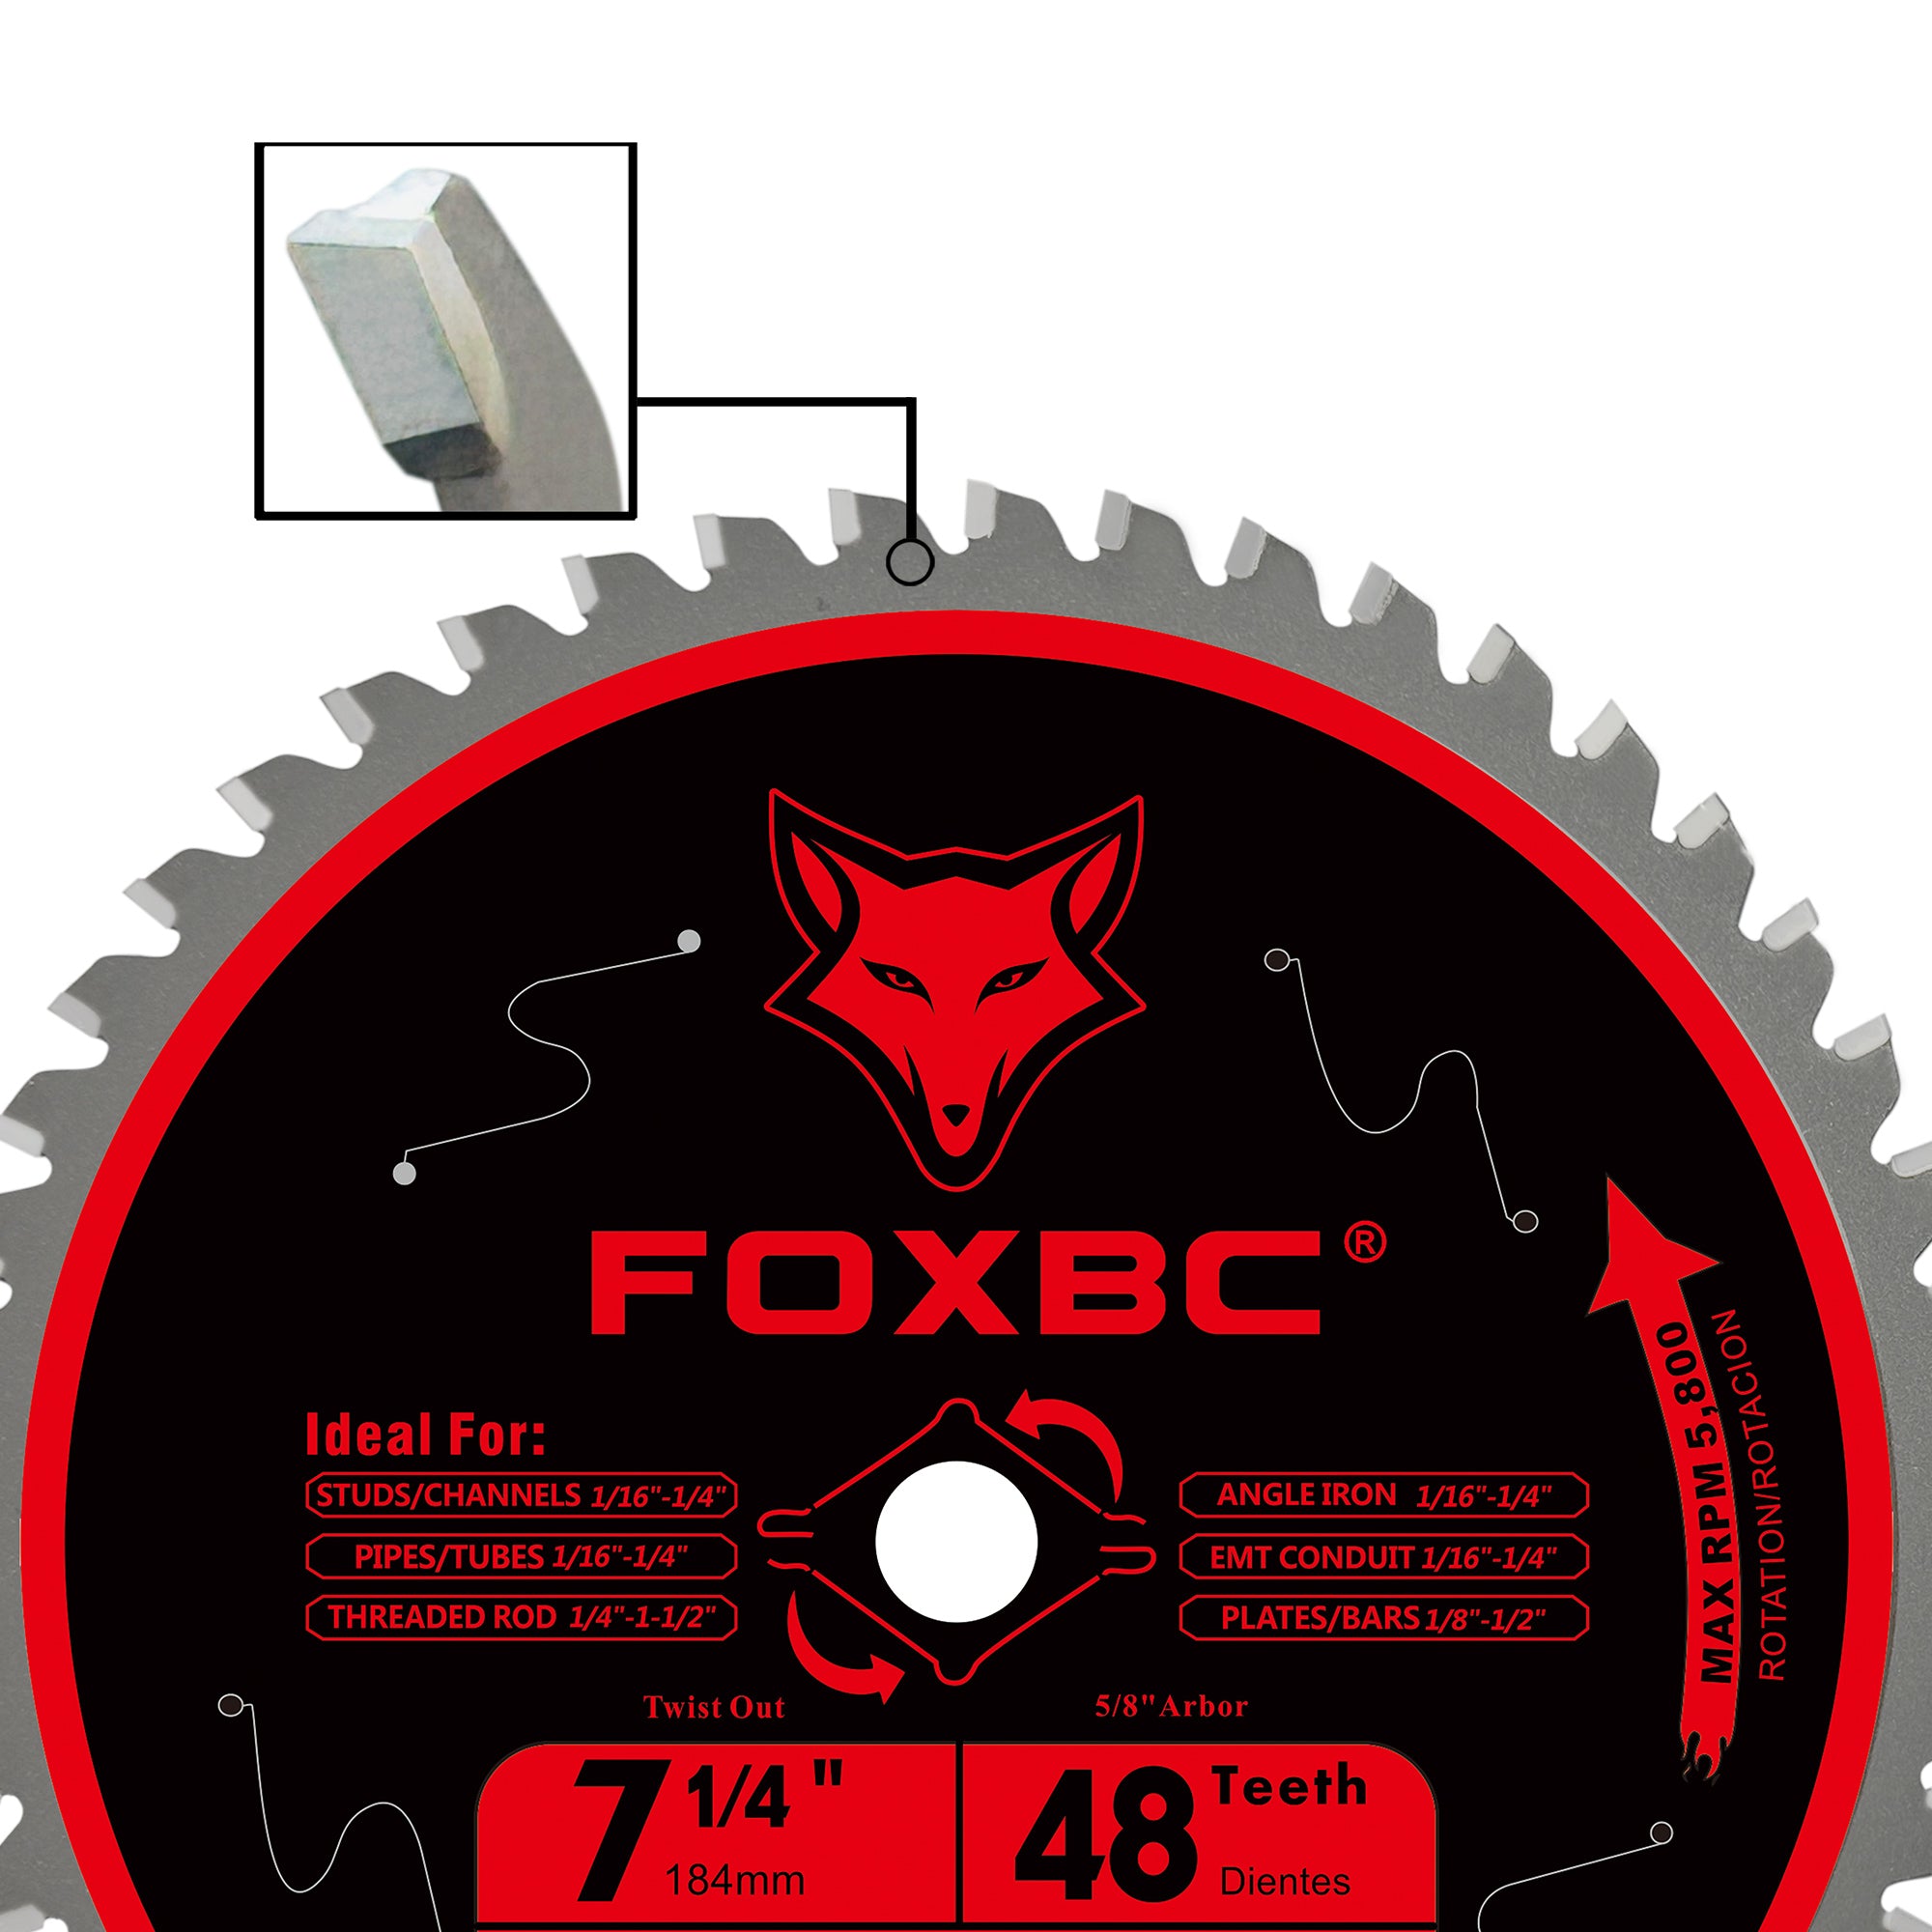 FOXBC 7-1/4 inch 48 Teeth Circular Saw Blade for Metal and Stainless Steel Cutting, Replacement for Diablo D0748CF Ceramic Carbide Saw Blade